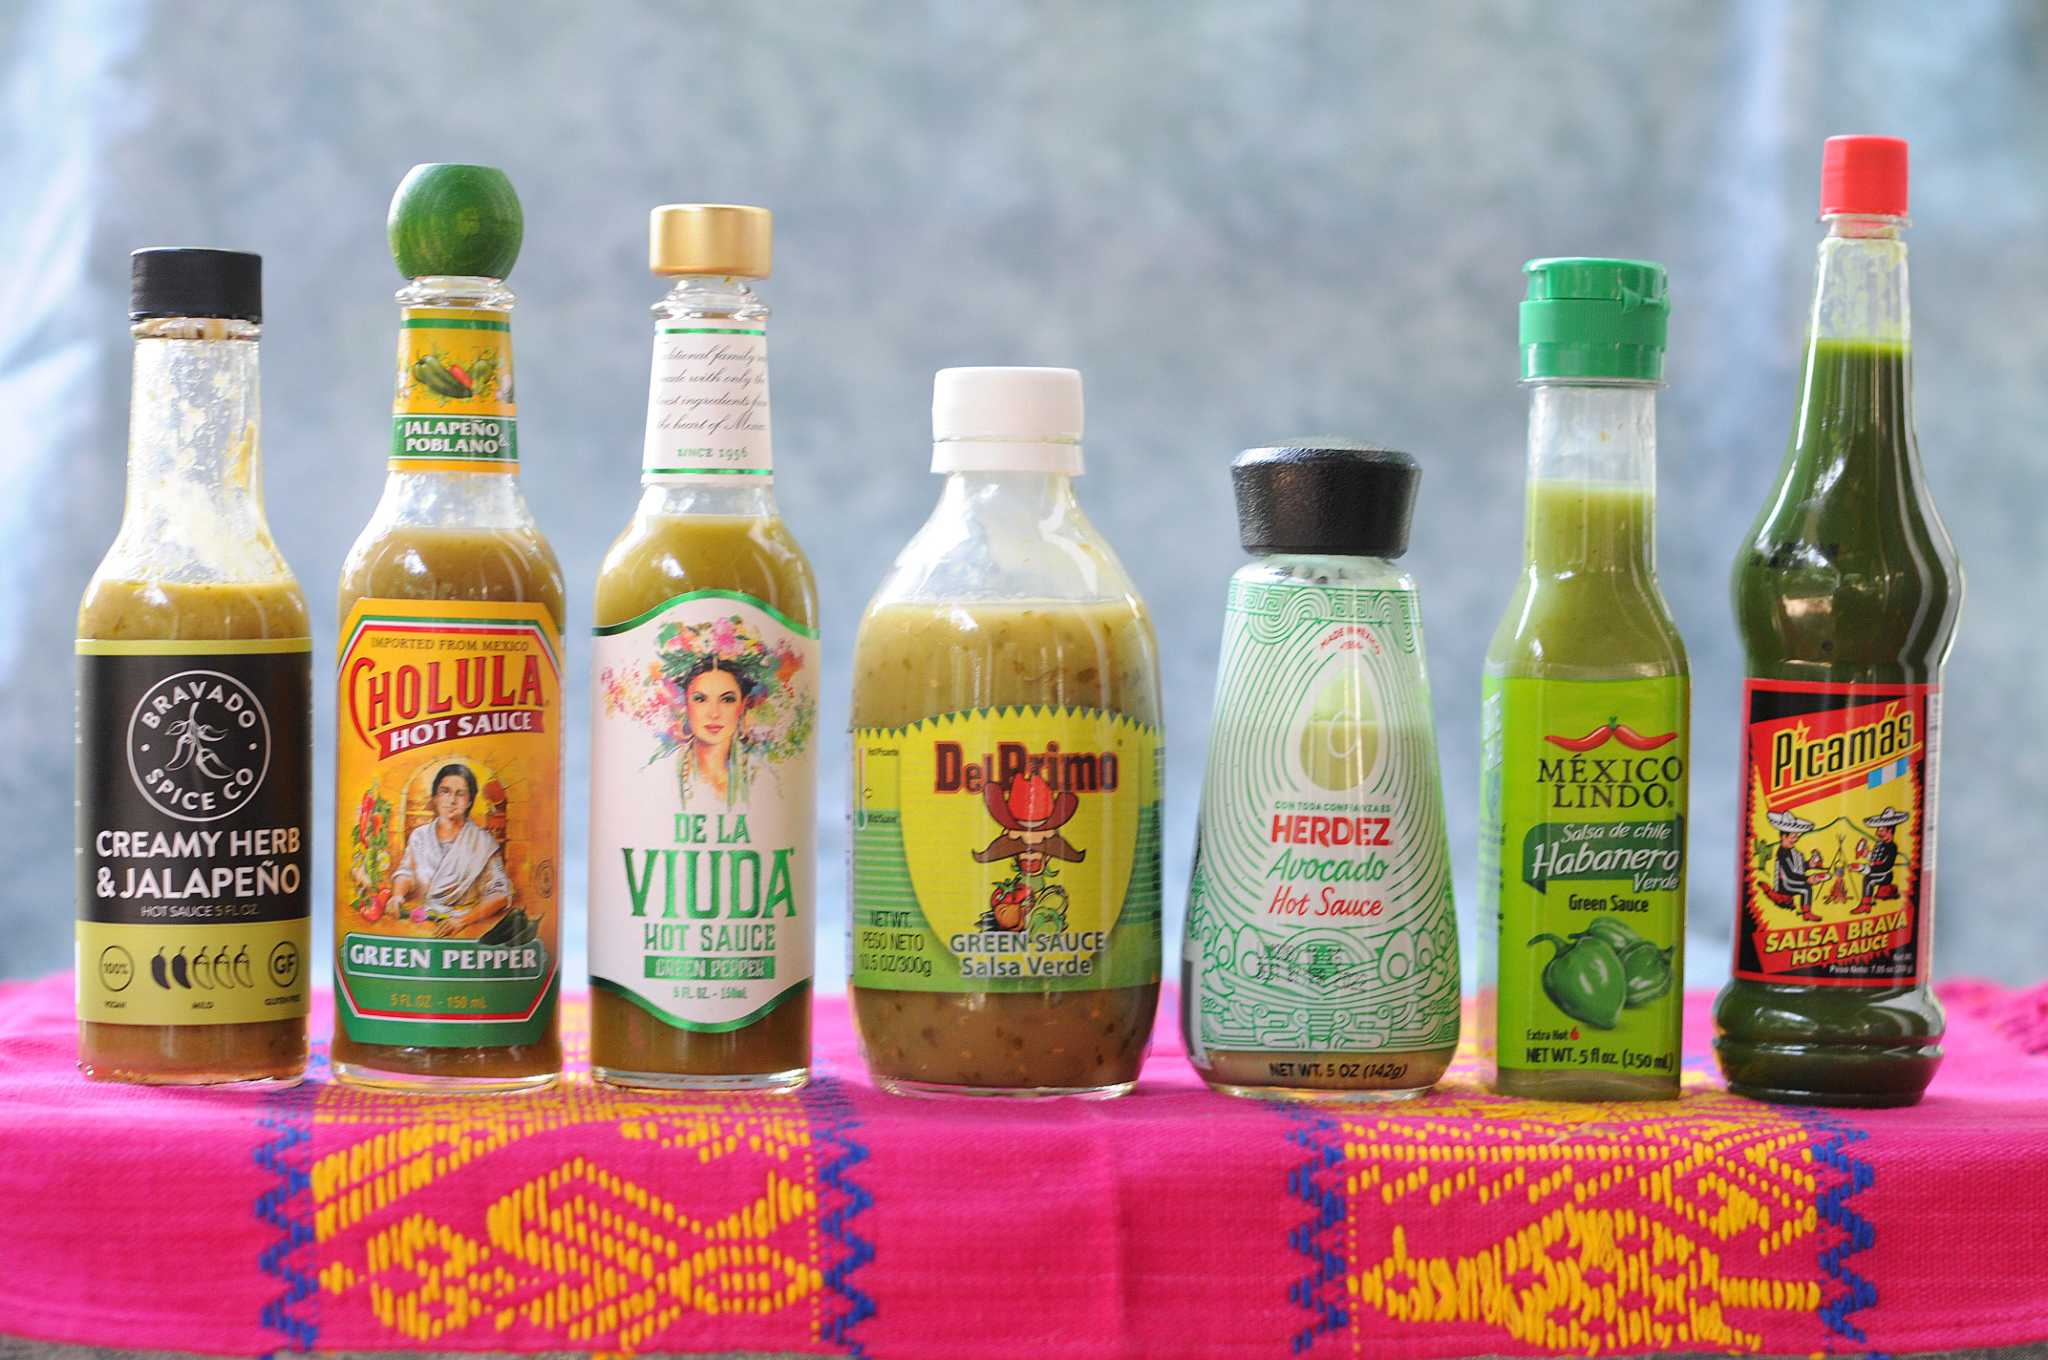 I Tried 5 of the Most Popular Hot Sauce Brands and Cholula Was My Favorite